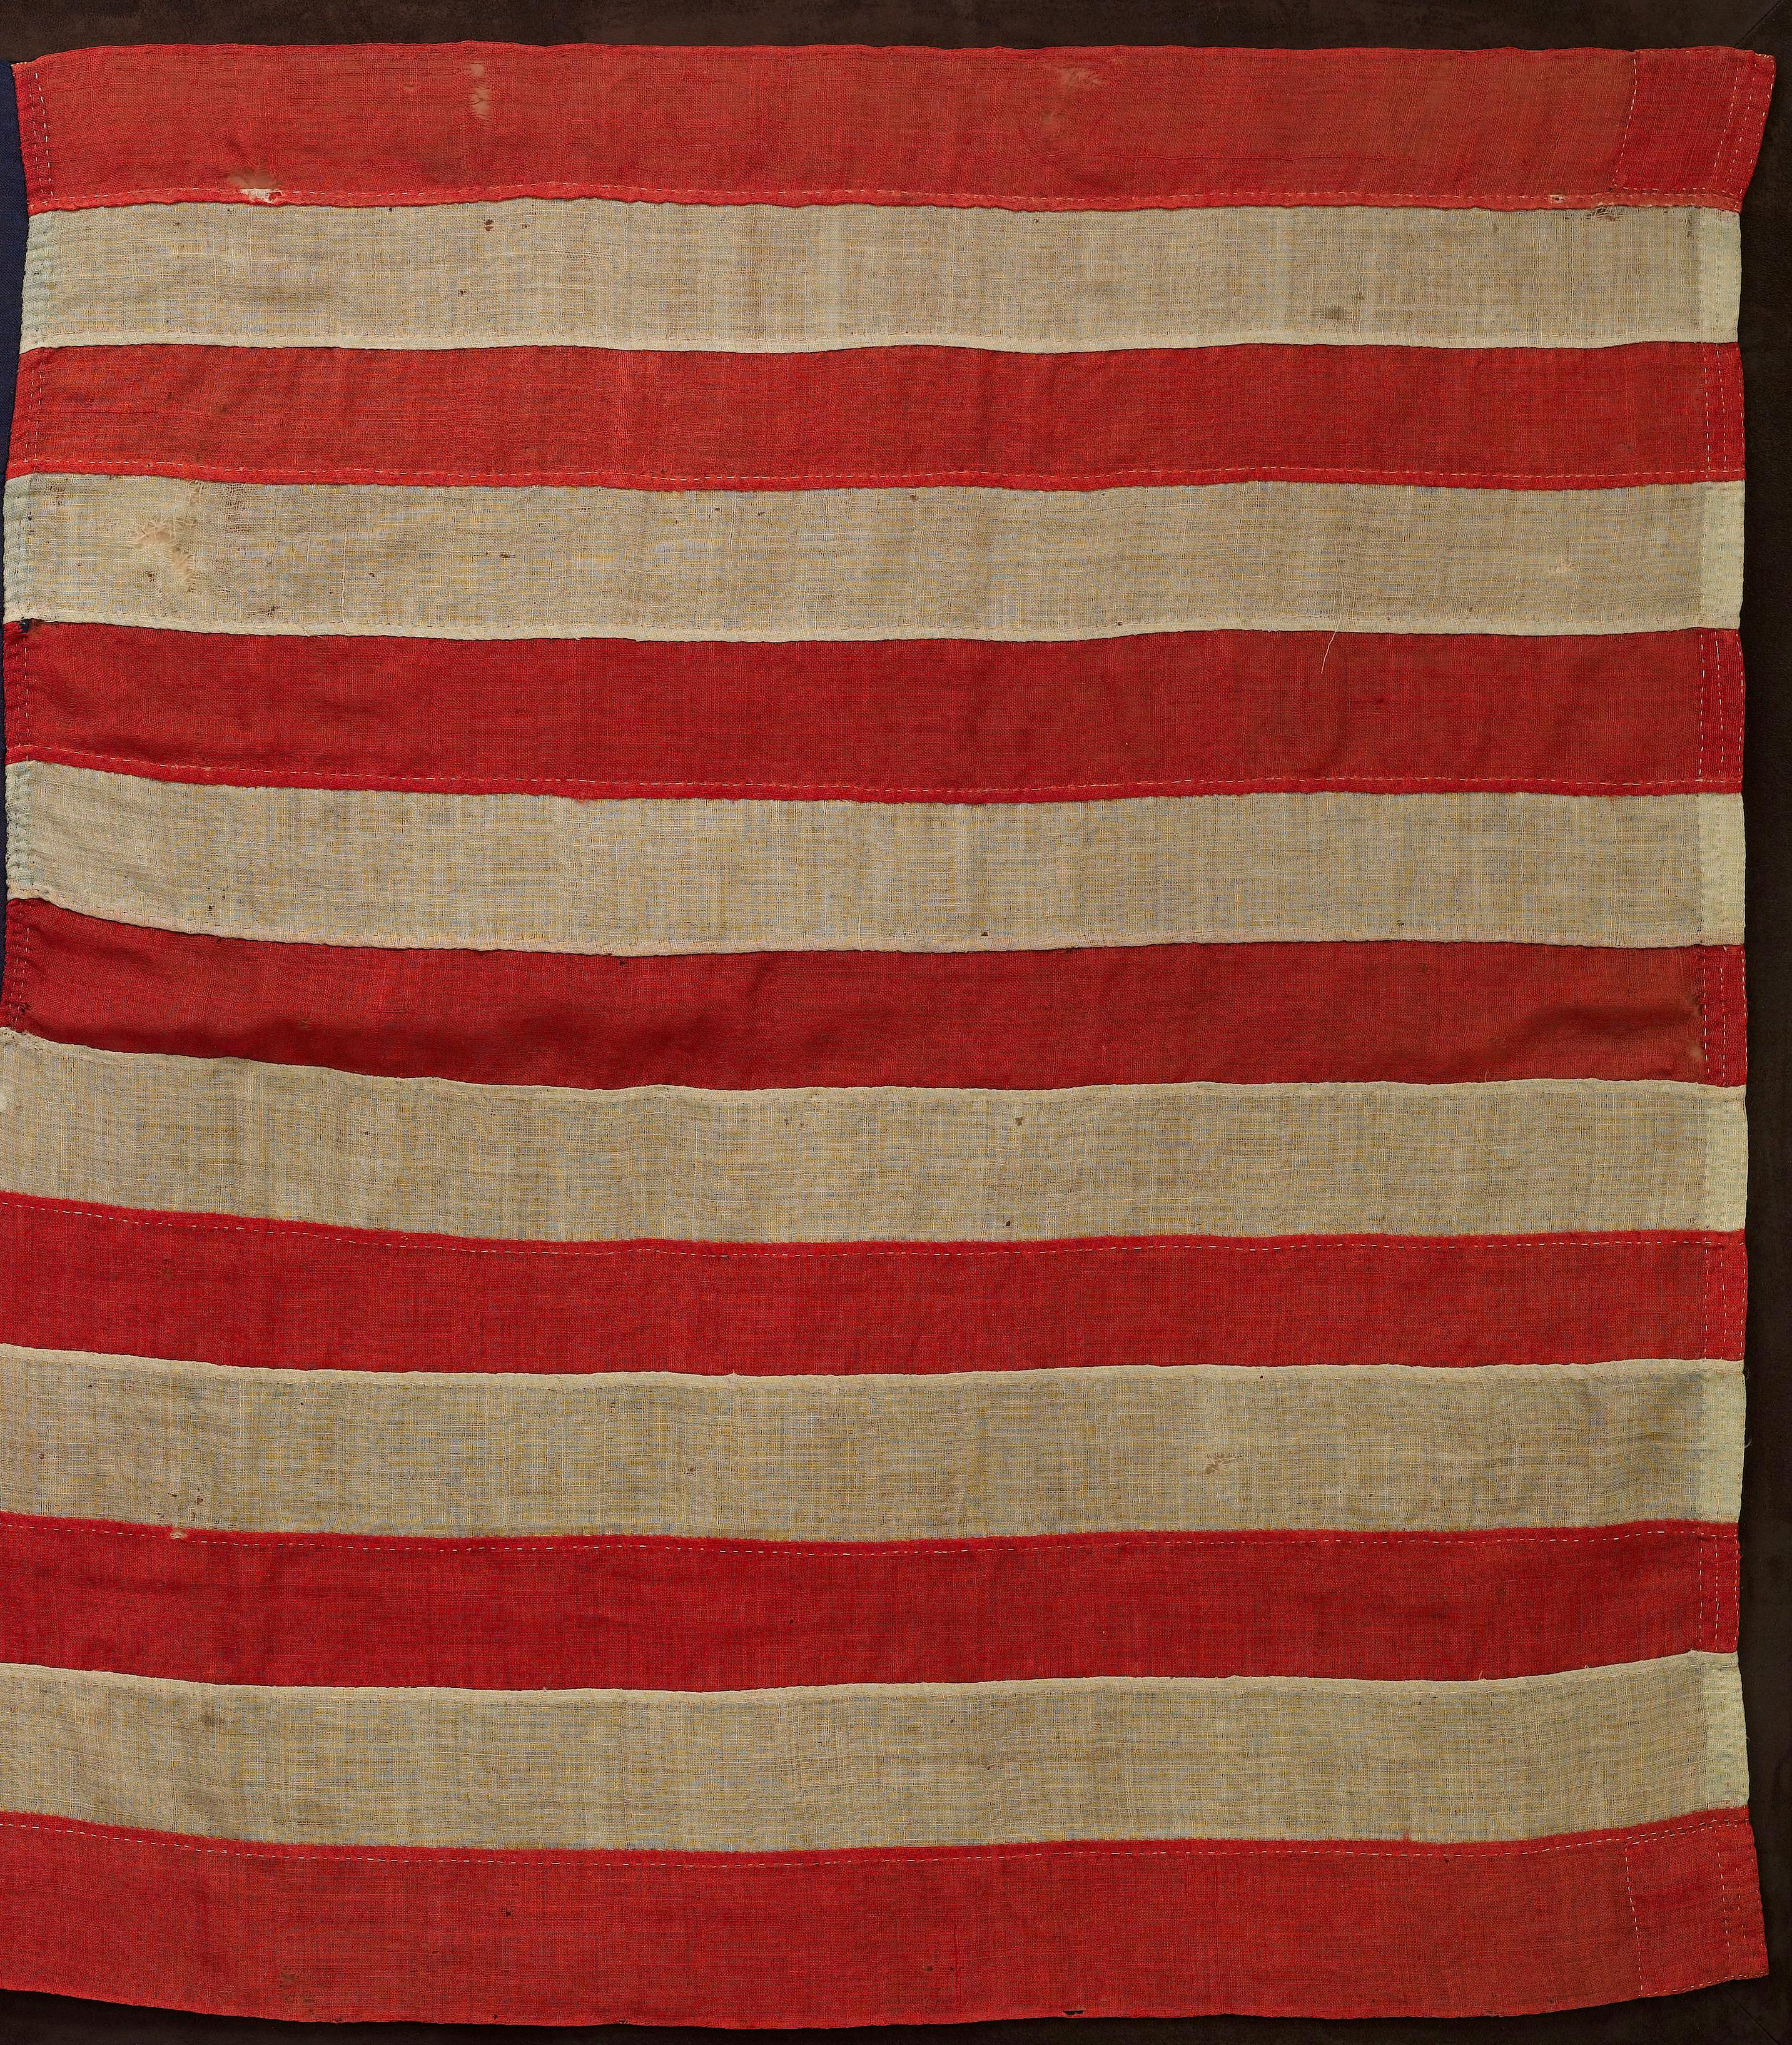 how many stars were on the union flag during the civil war